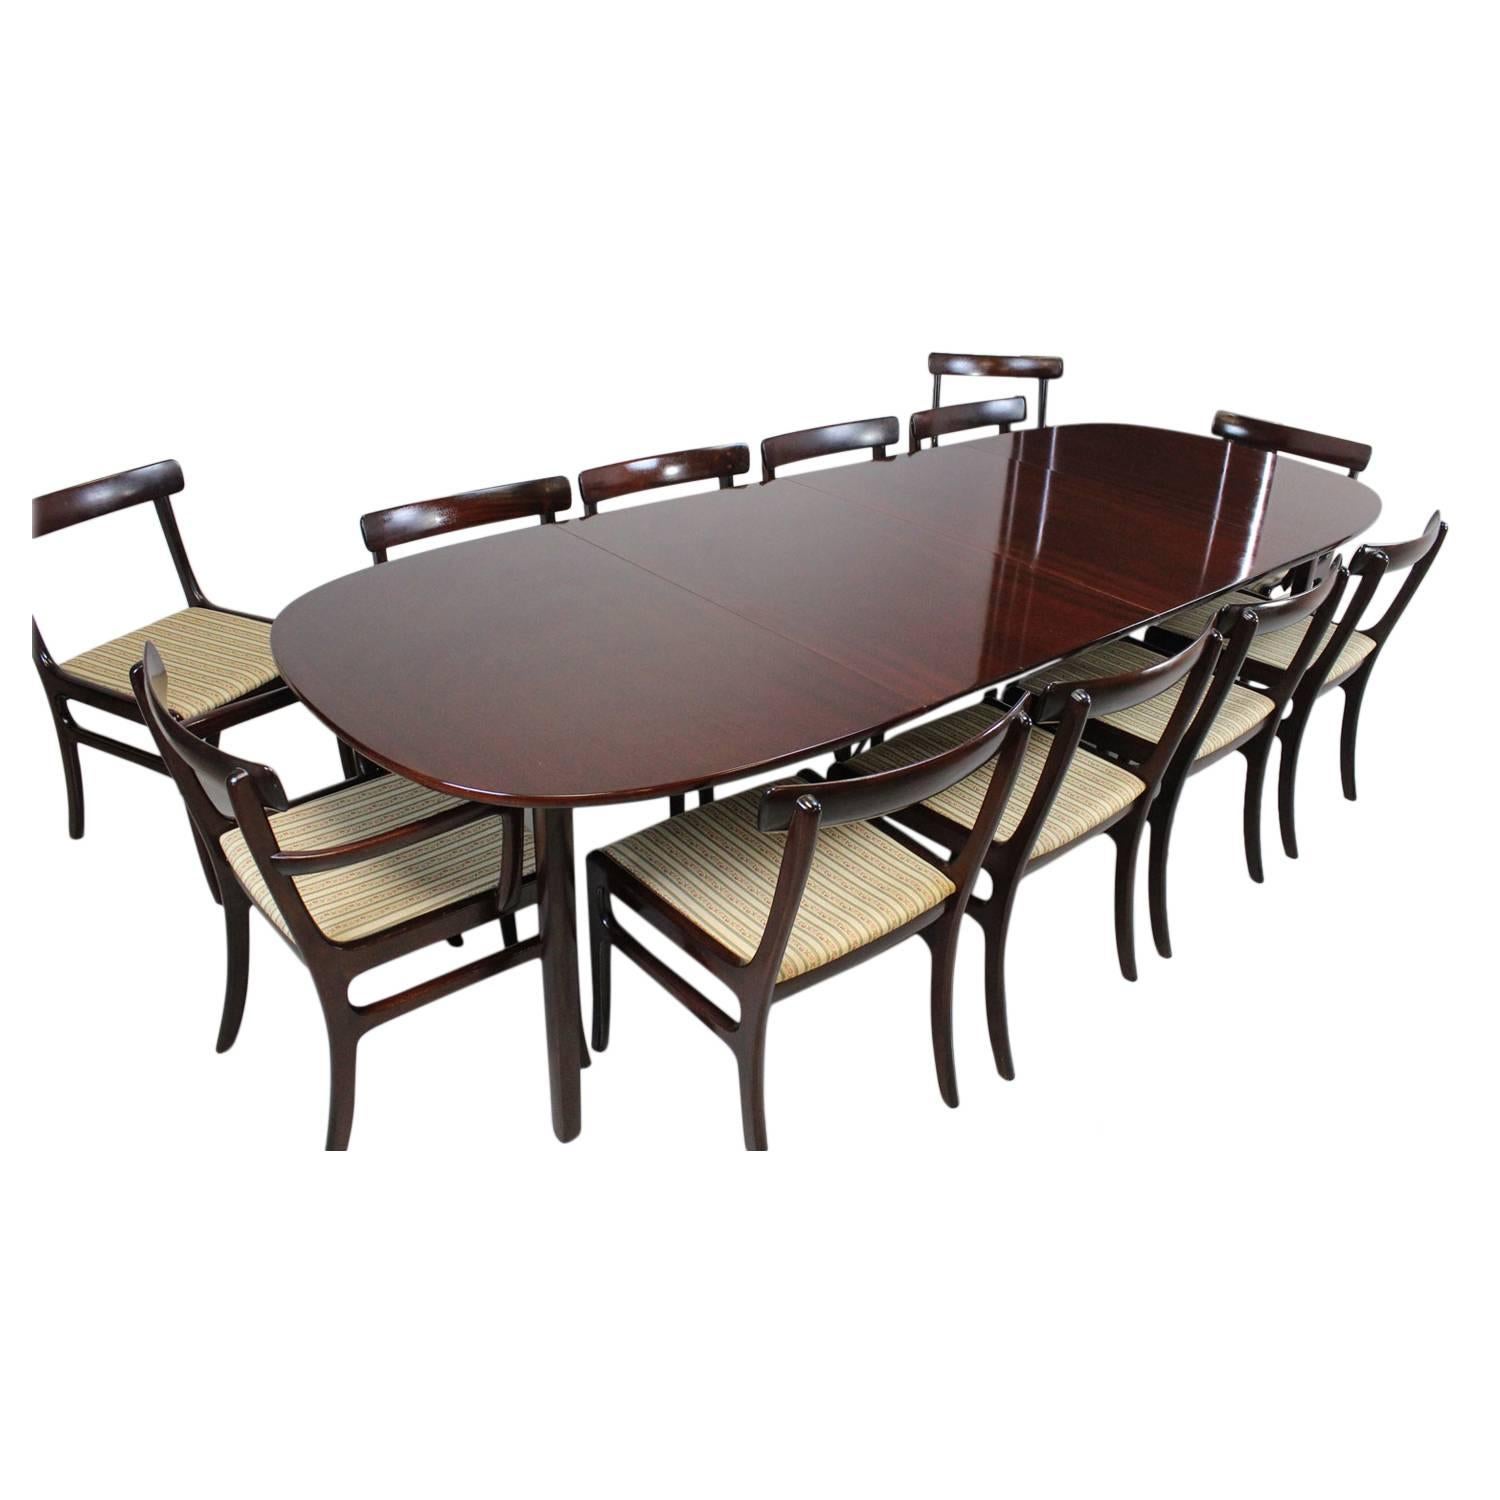 Ole Wanscher Dining Table and Twelve Chairs